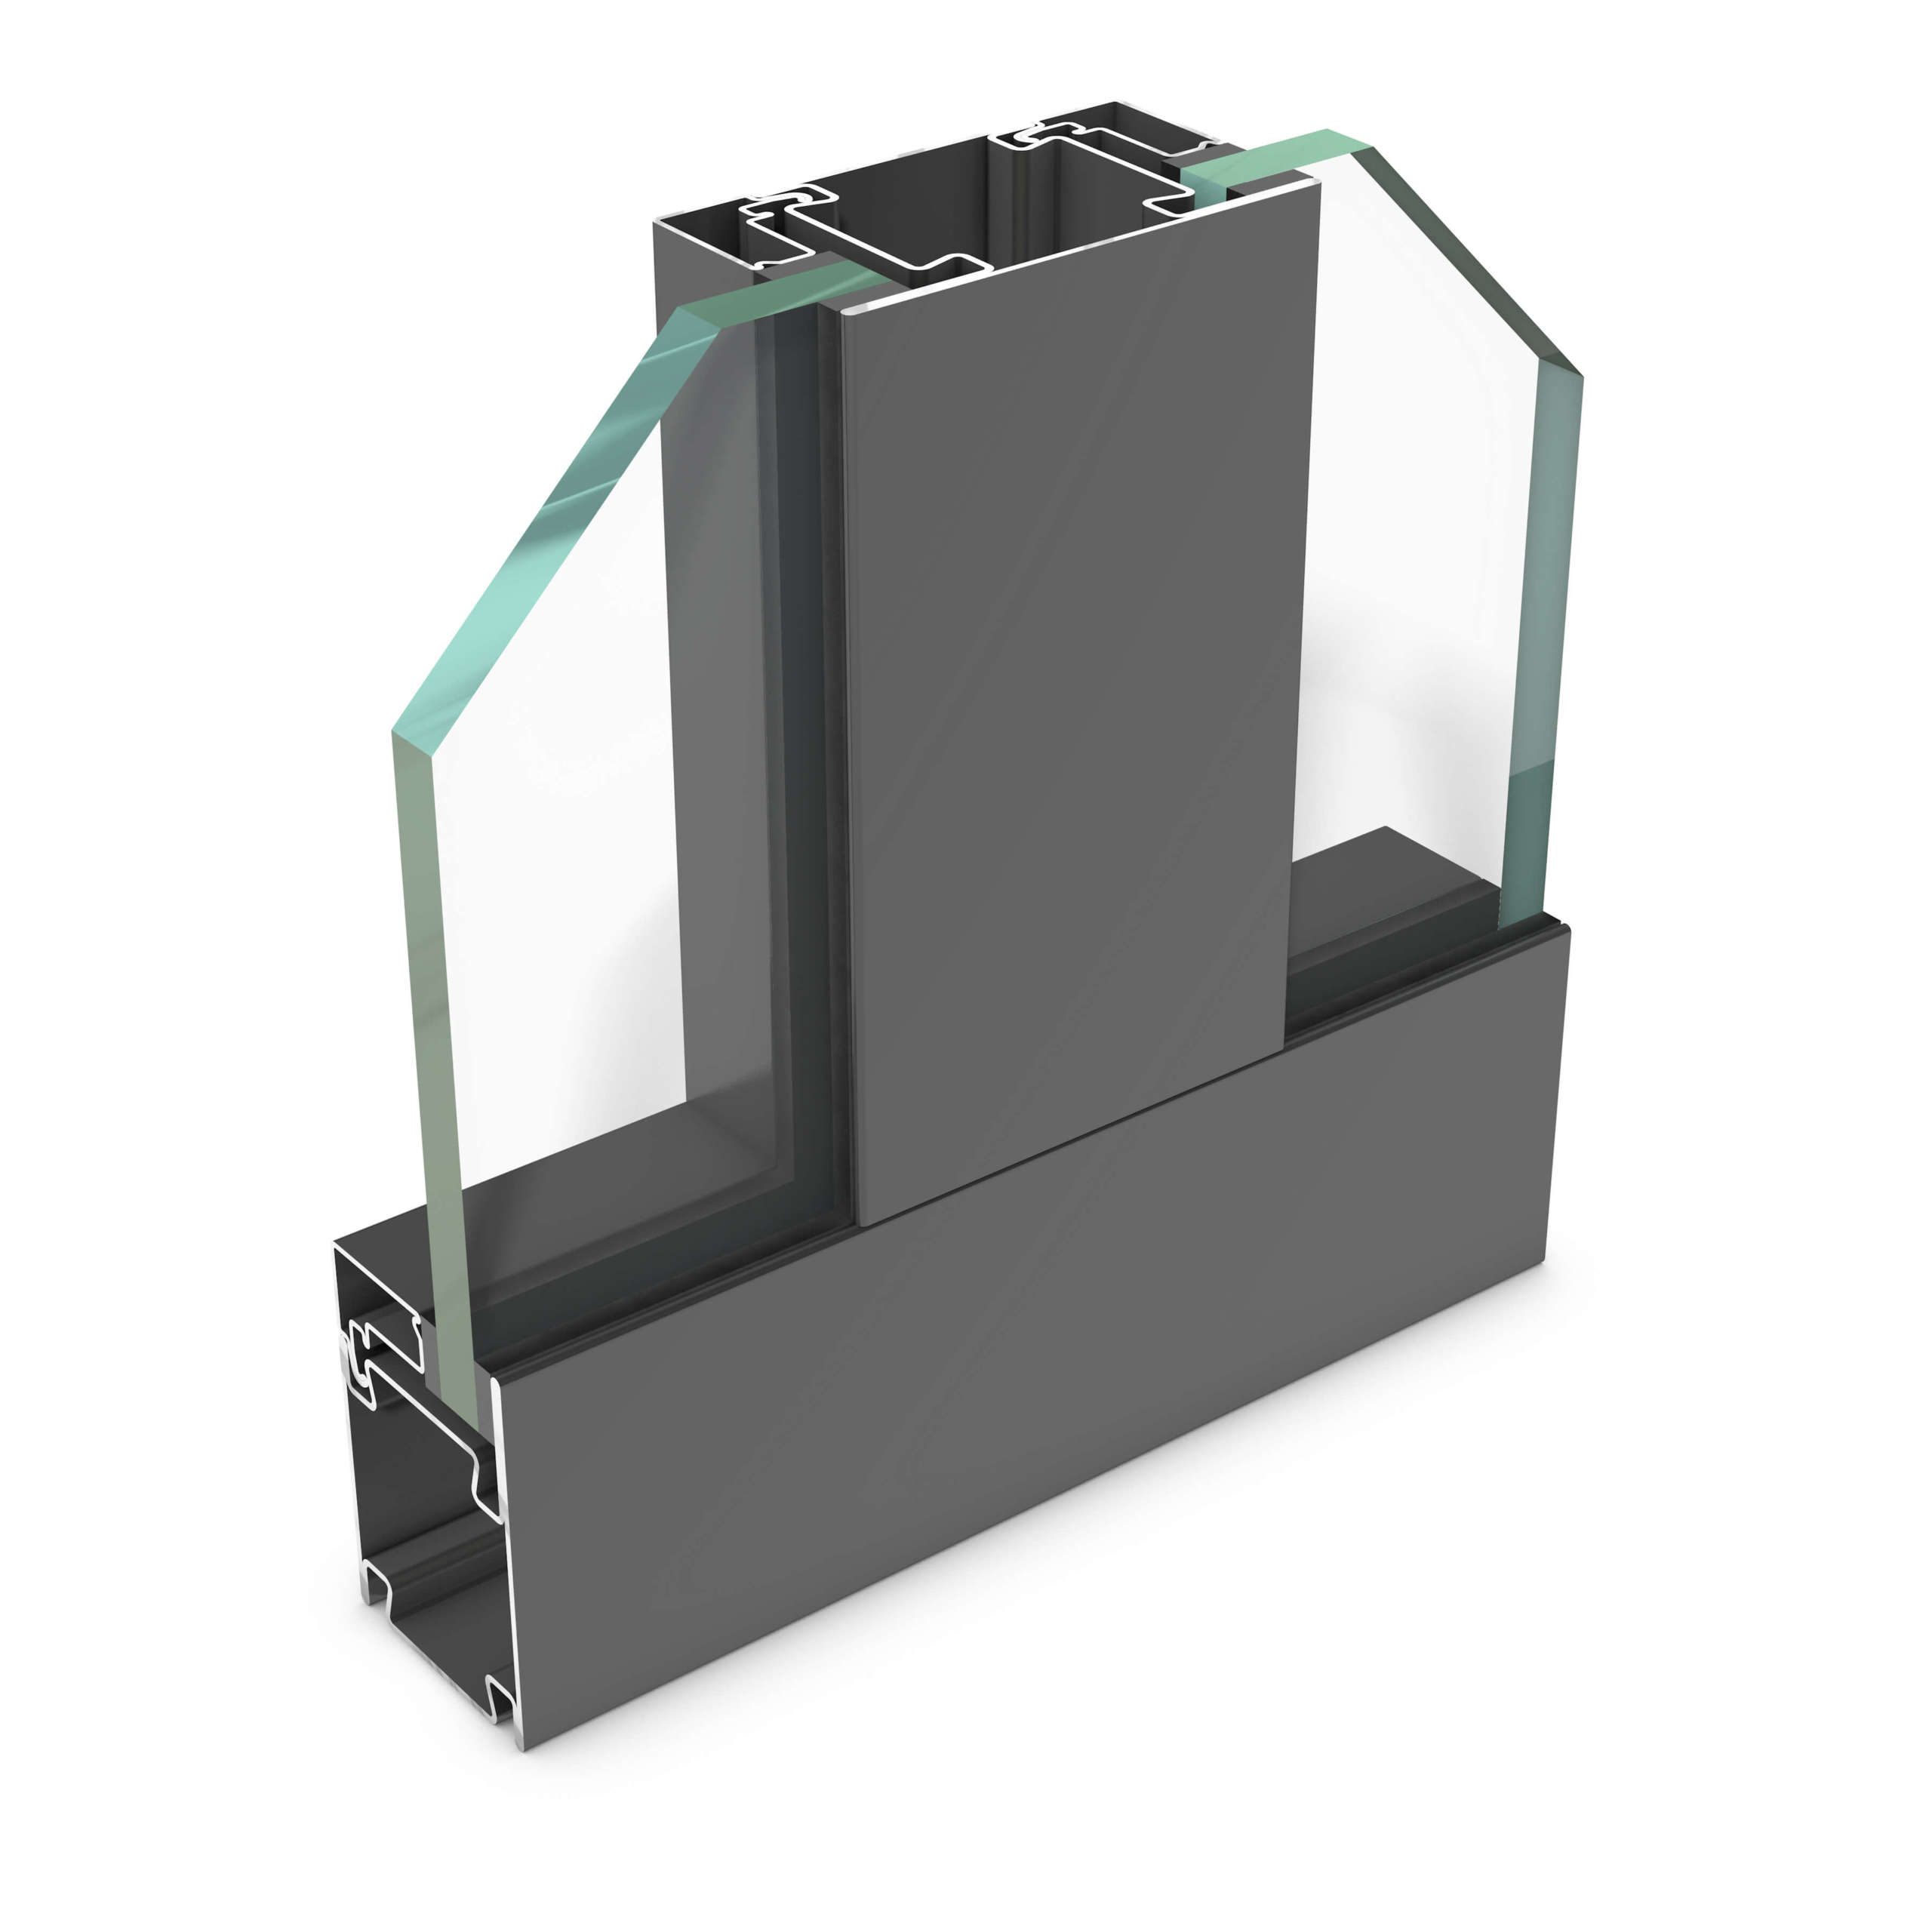 rp hermetic 55FP-60 – steel profile system for fire protection doors and partition walls